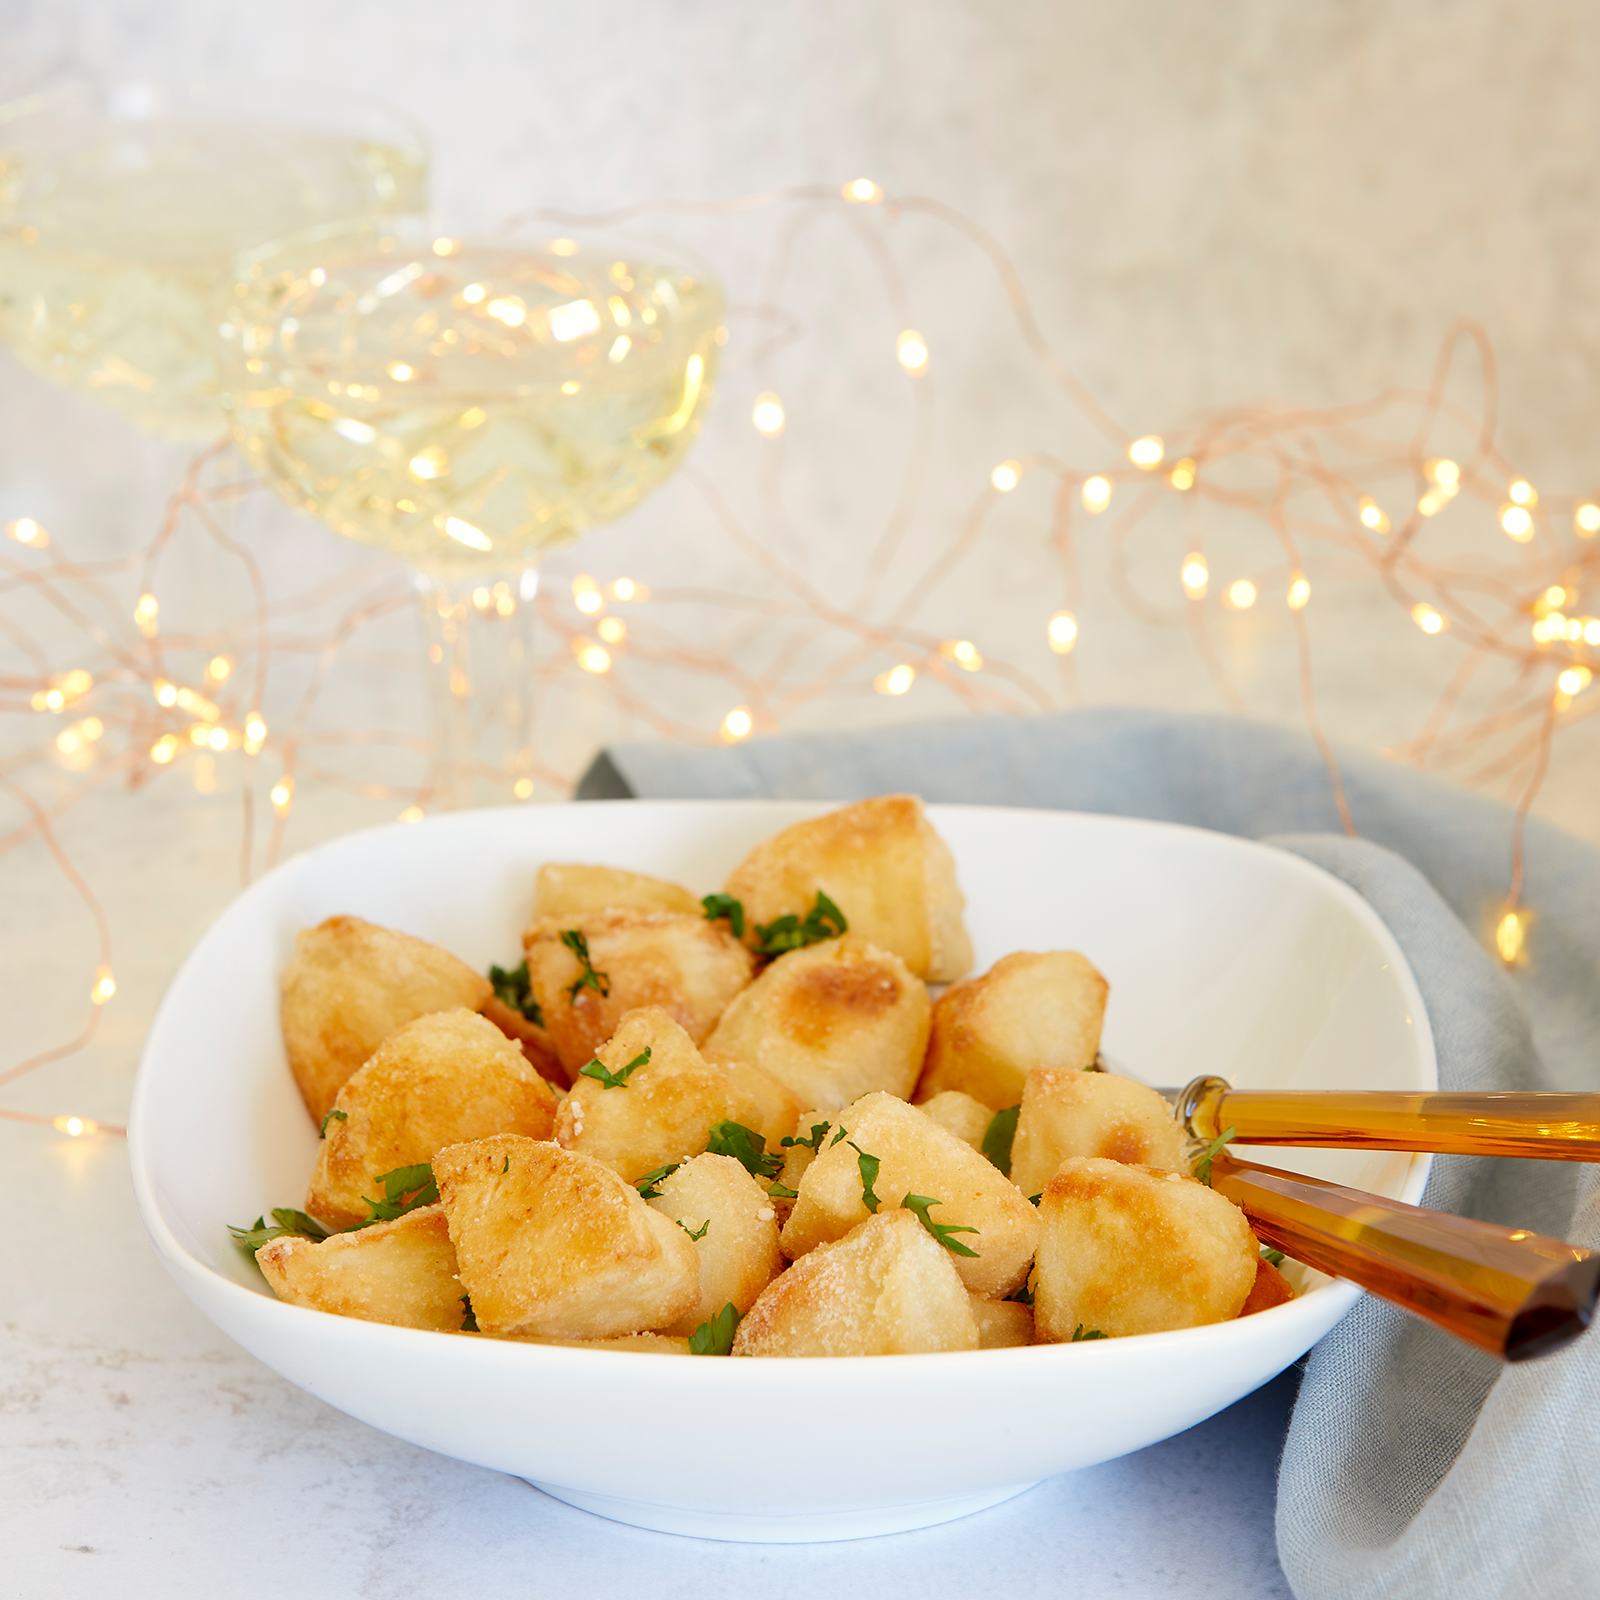 Gluten-free crispy baked potatoes in a white bowl with serving utensils ready to serve.The potatoes have been sprinkled with freshly chopped herbs. Fairy lights and champagne glasses are in the background to create a festive feel.